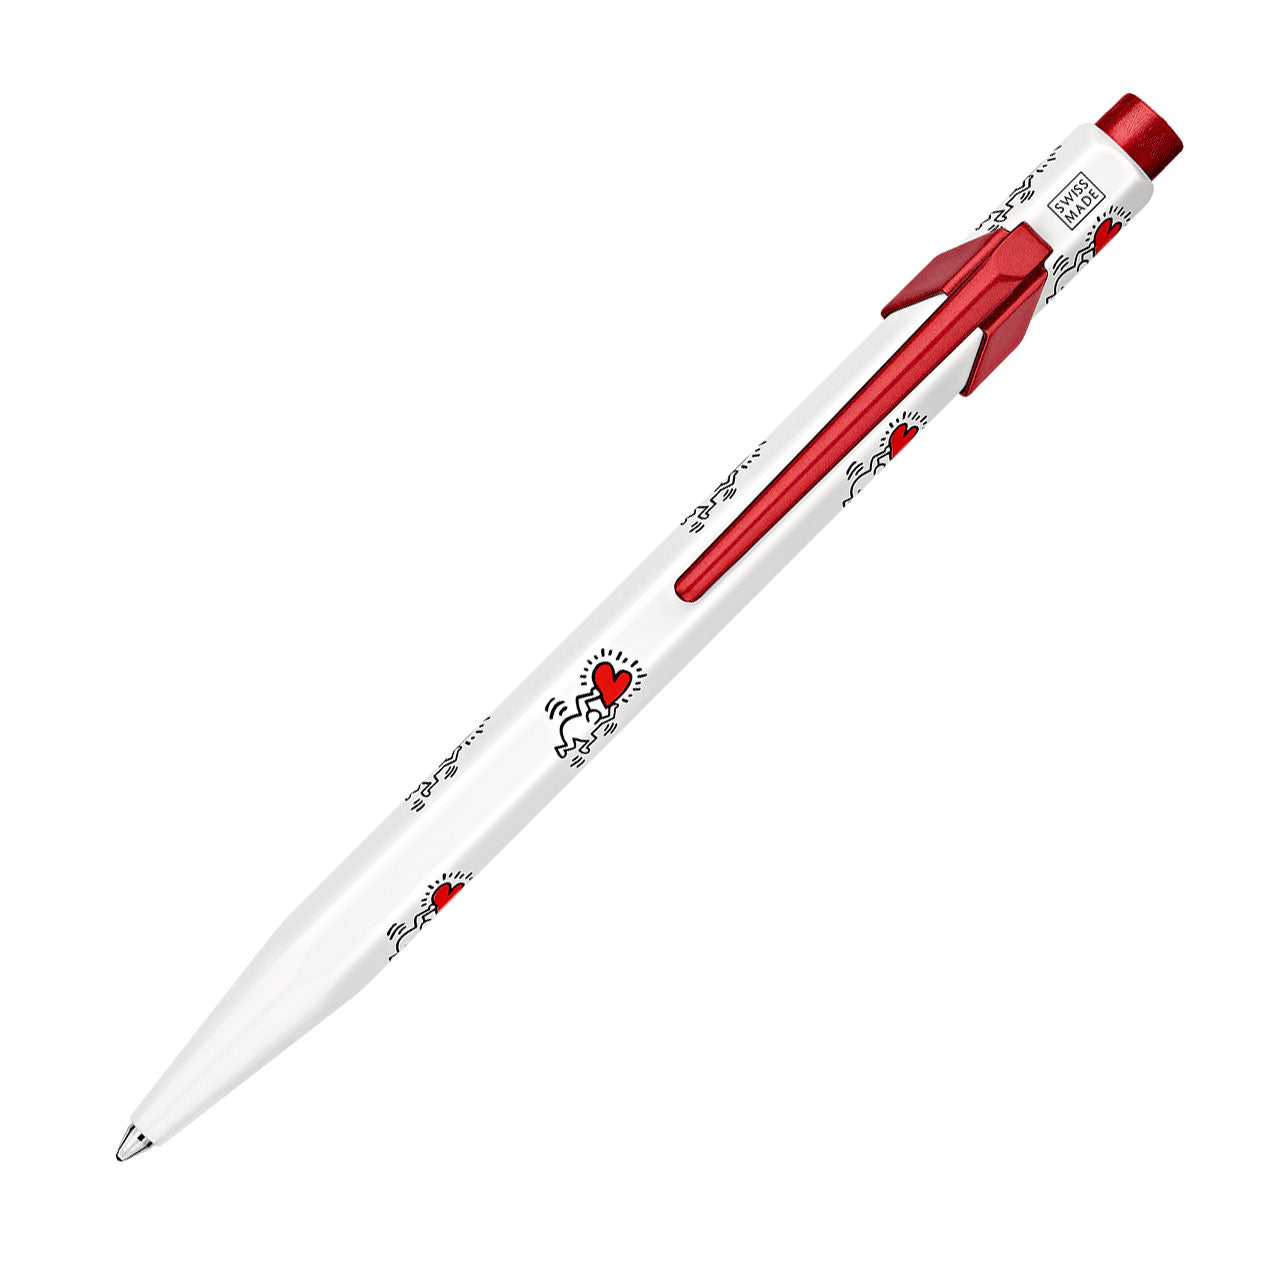 Caran D'Ache 849 Keith Haring Limited Edition Ballpoint Pen White